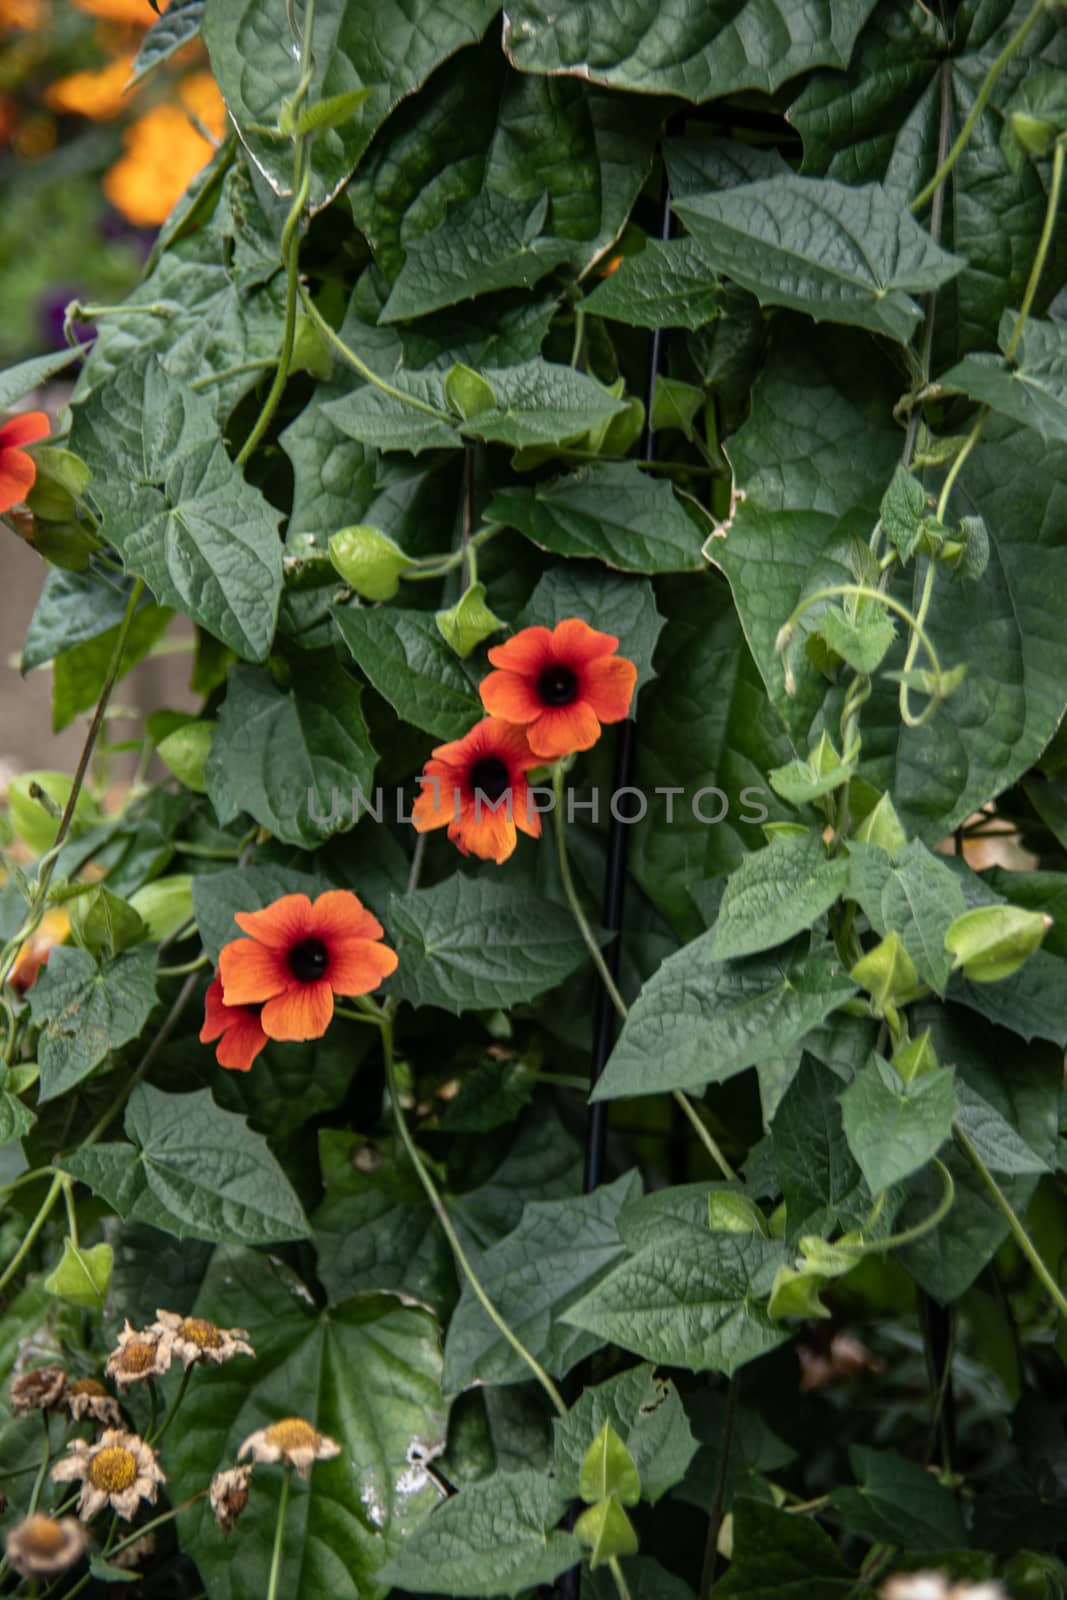 Vine plants with green leaves and red flowers